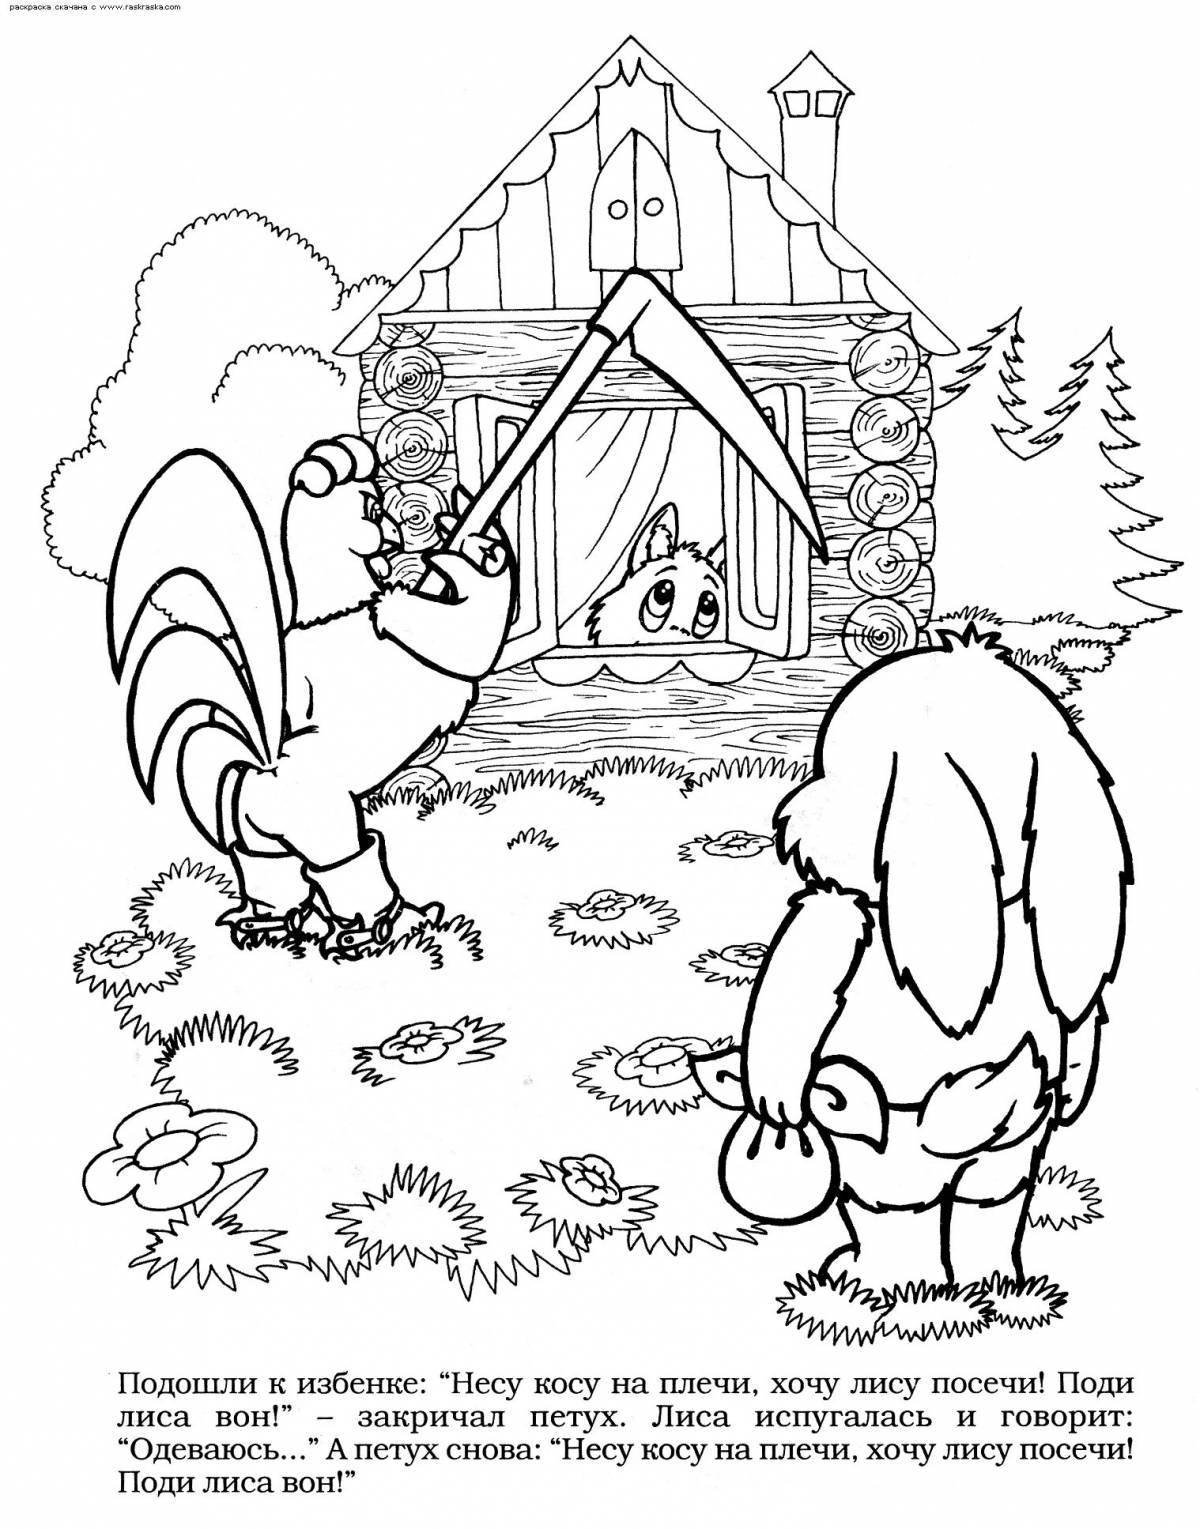 Coloring page wonderful hare hut